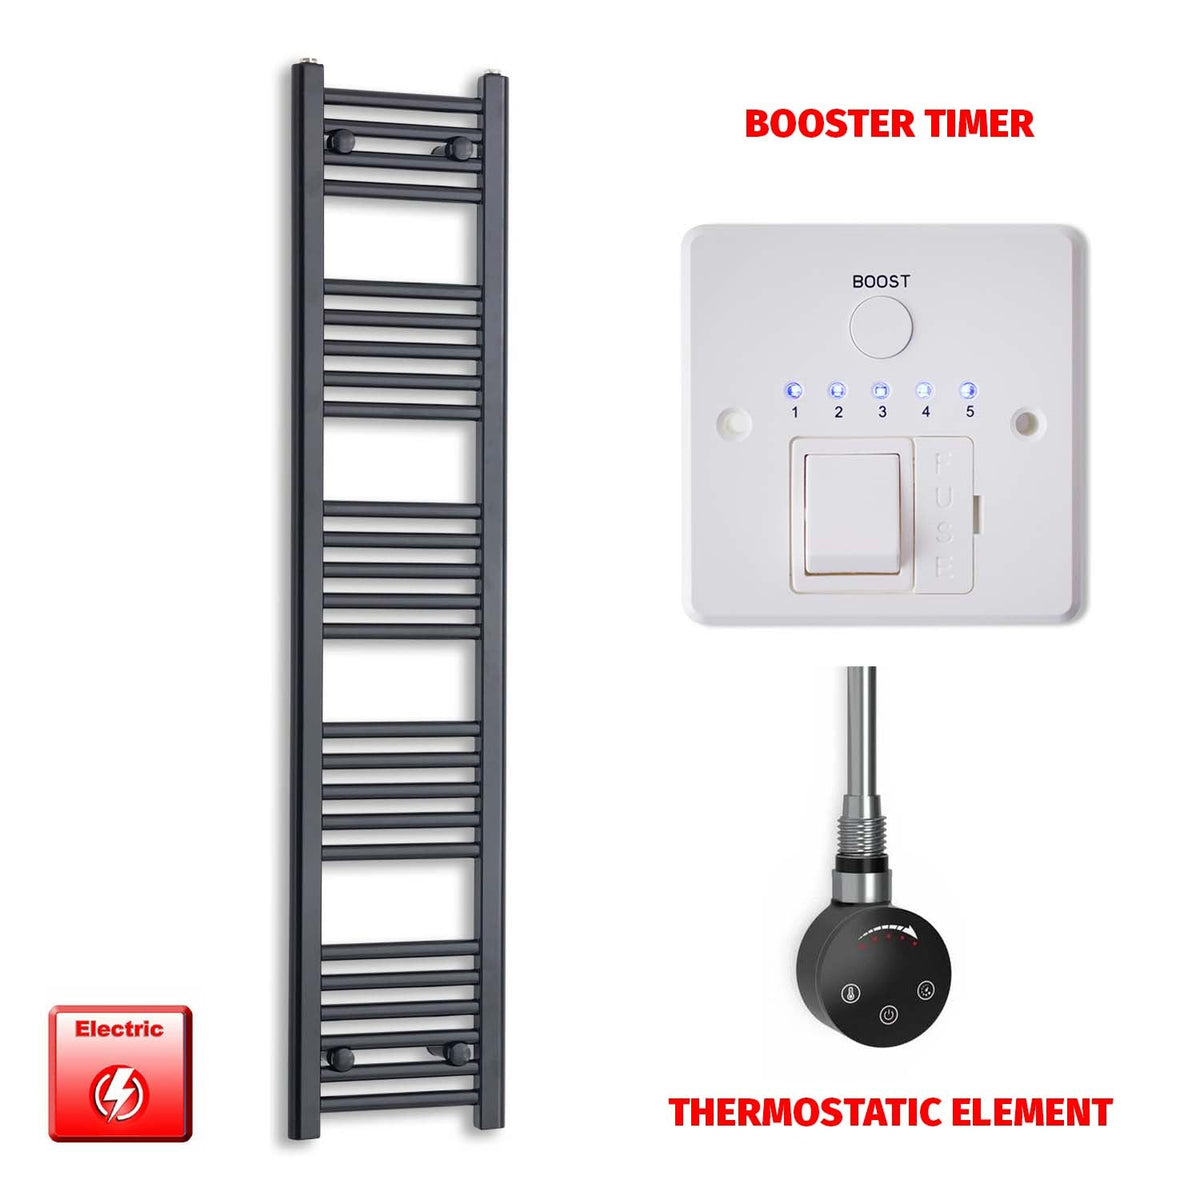 1400 x 300 Flat Black Pre-Filled Electric Heated Towel Radiator HTR Smart Thermostatic Booster Timer